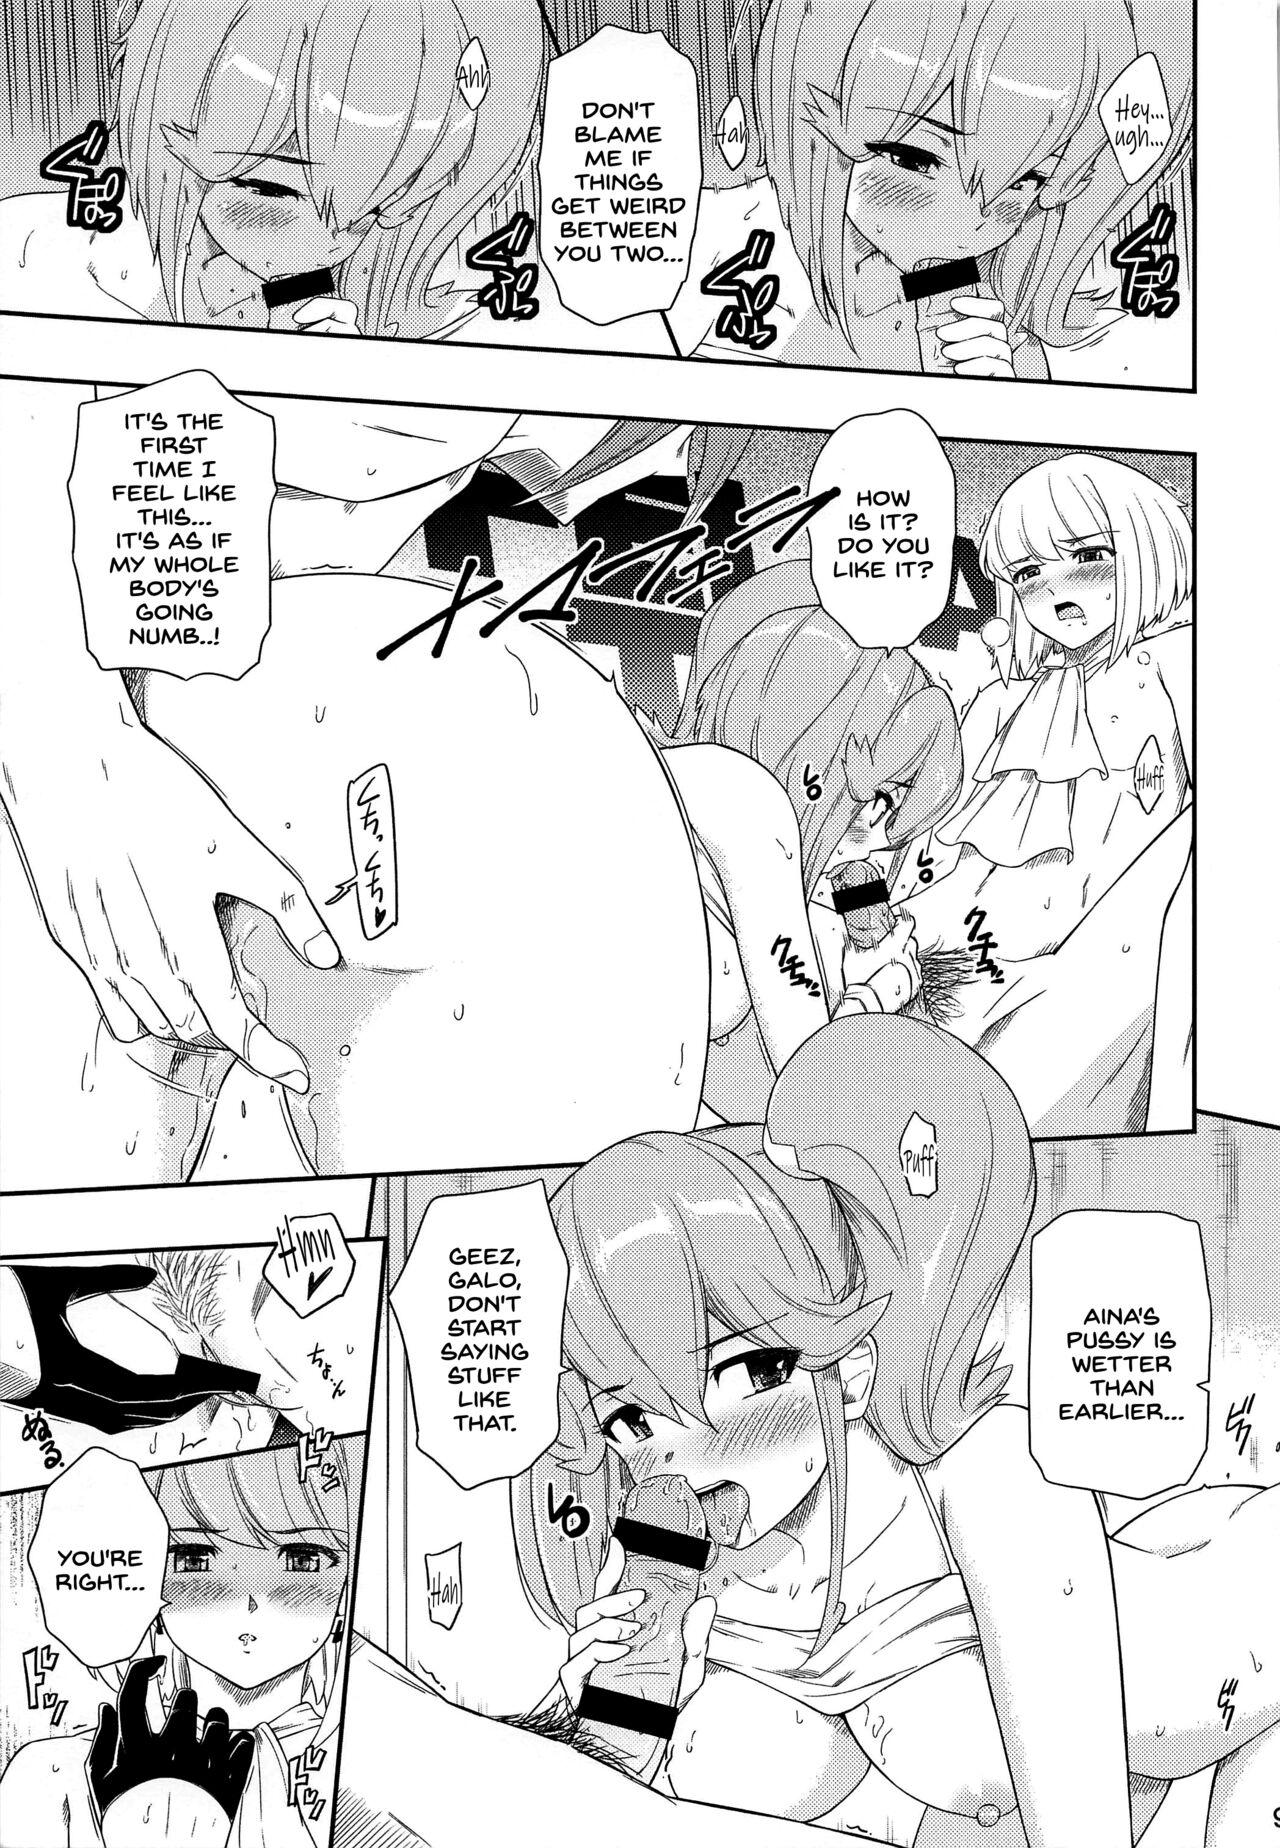 Scene EROMARE - Suddenly 3P sex is happening... Gay Tattoos - Page 8